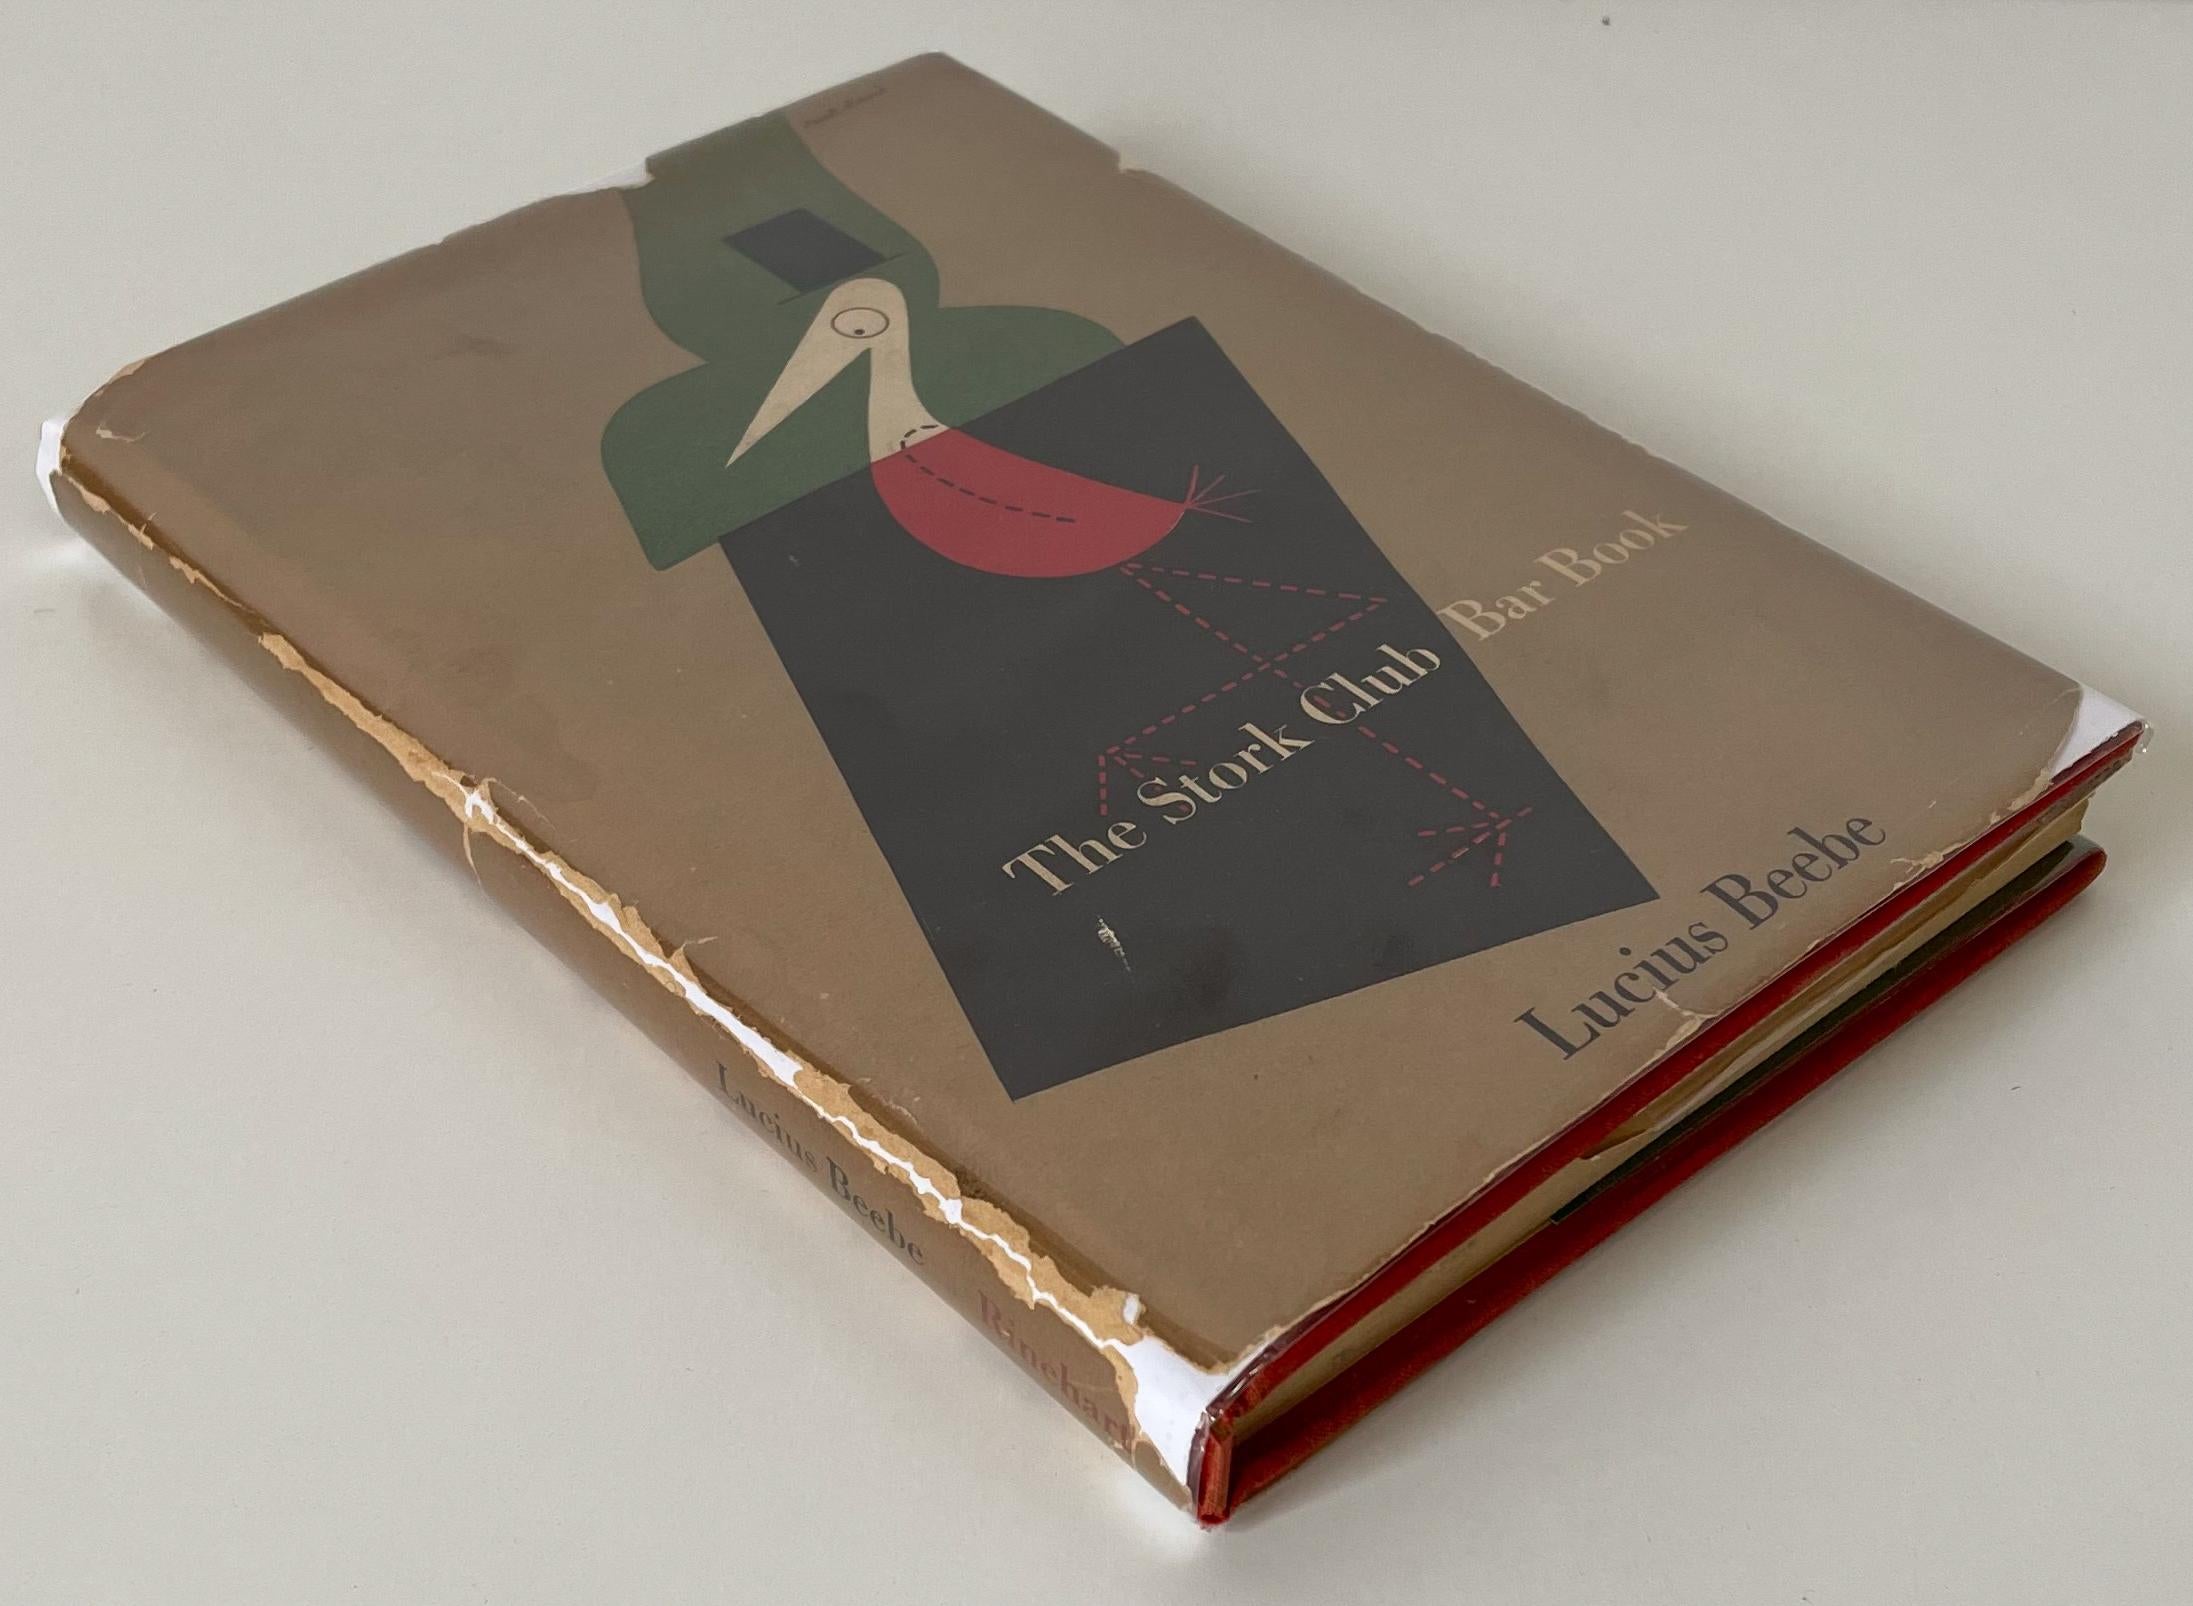 First edition, first printing of this classic Madmen-era mixology tome from one of New York's storied nightclubs. 136 pages, 8vo hardcover with price-clipped dust jacket. Cover and typography design by Paul Rand. Scarce, especially with a laid-in